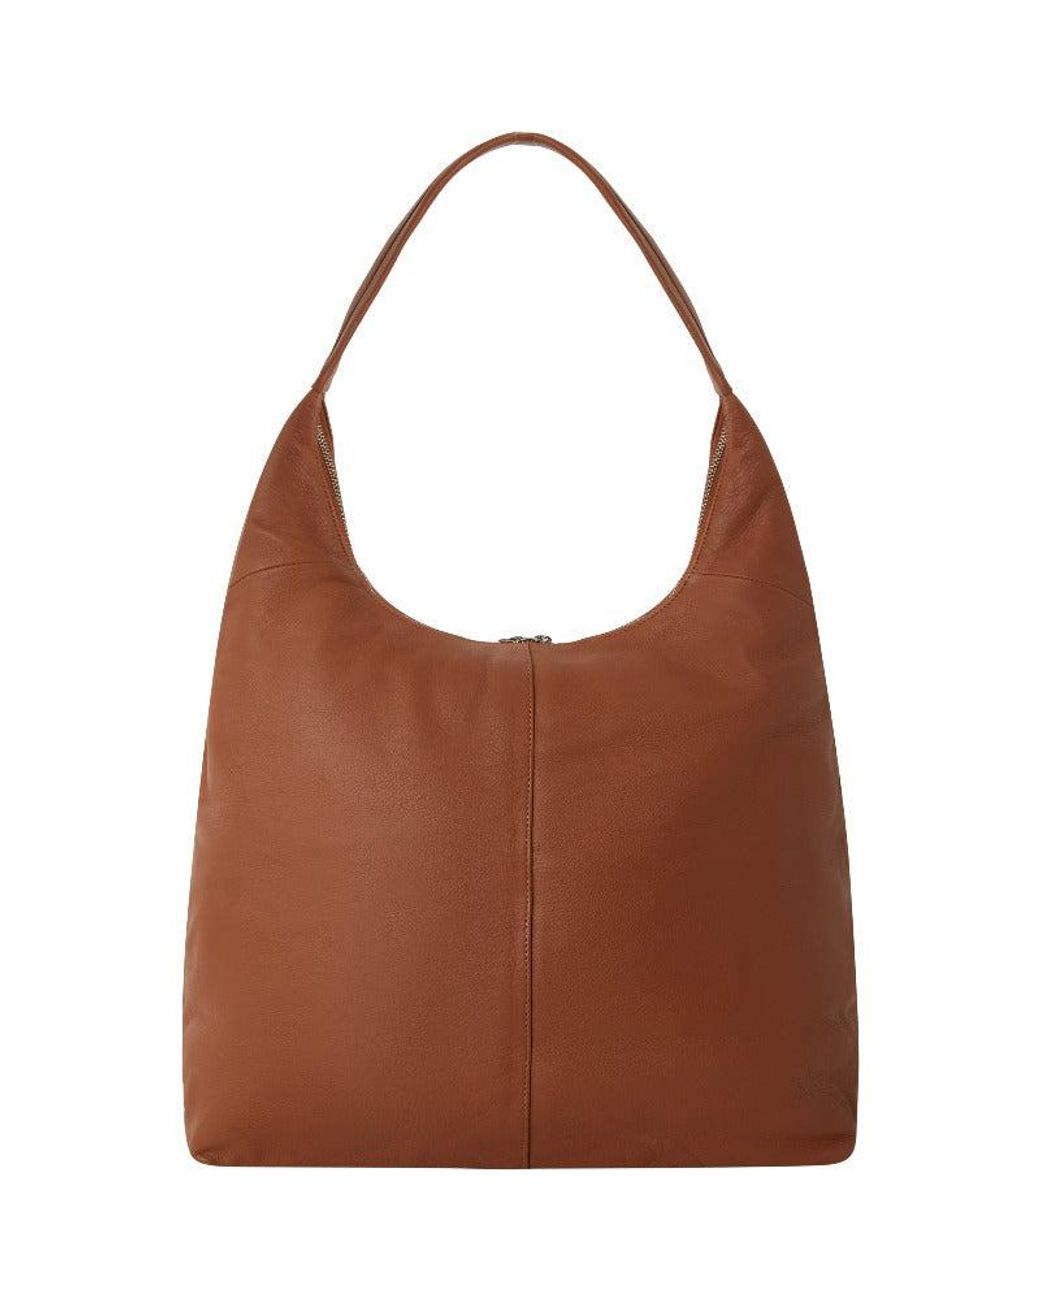 Brix + Bailey Camel Large Zip Top Leather Hobo Bag | Bxabd in Brown | Lyst  UK